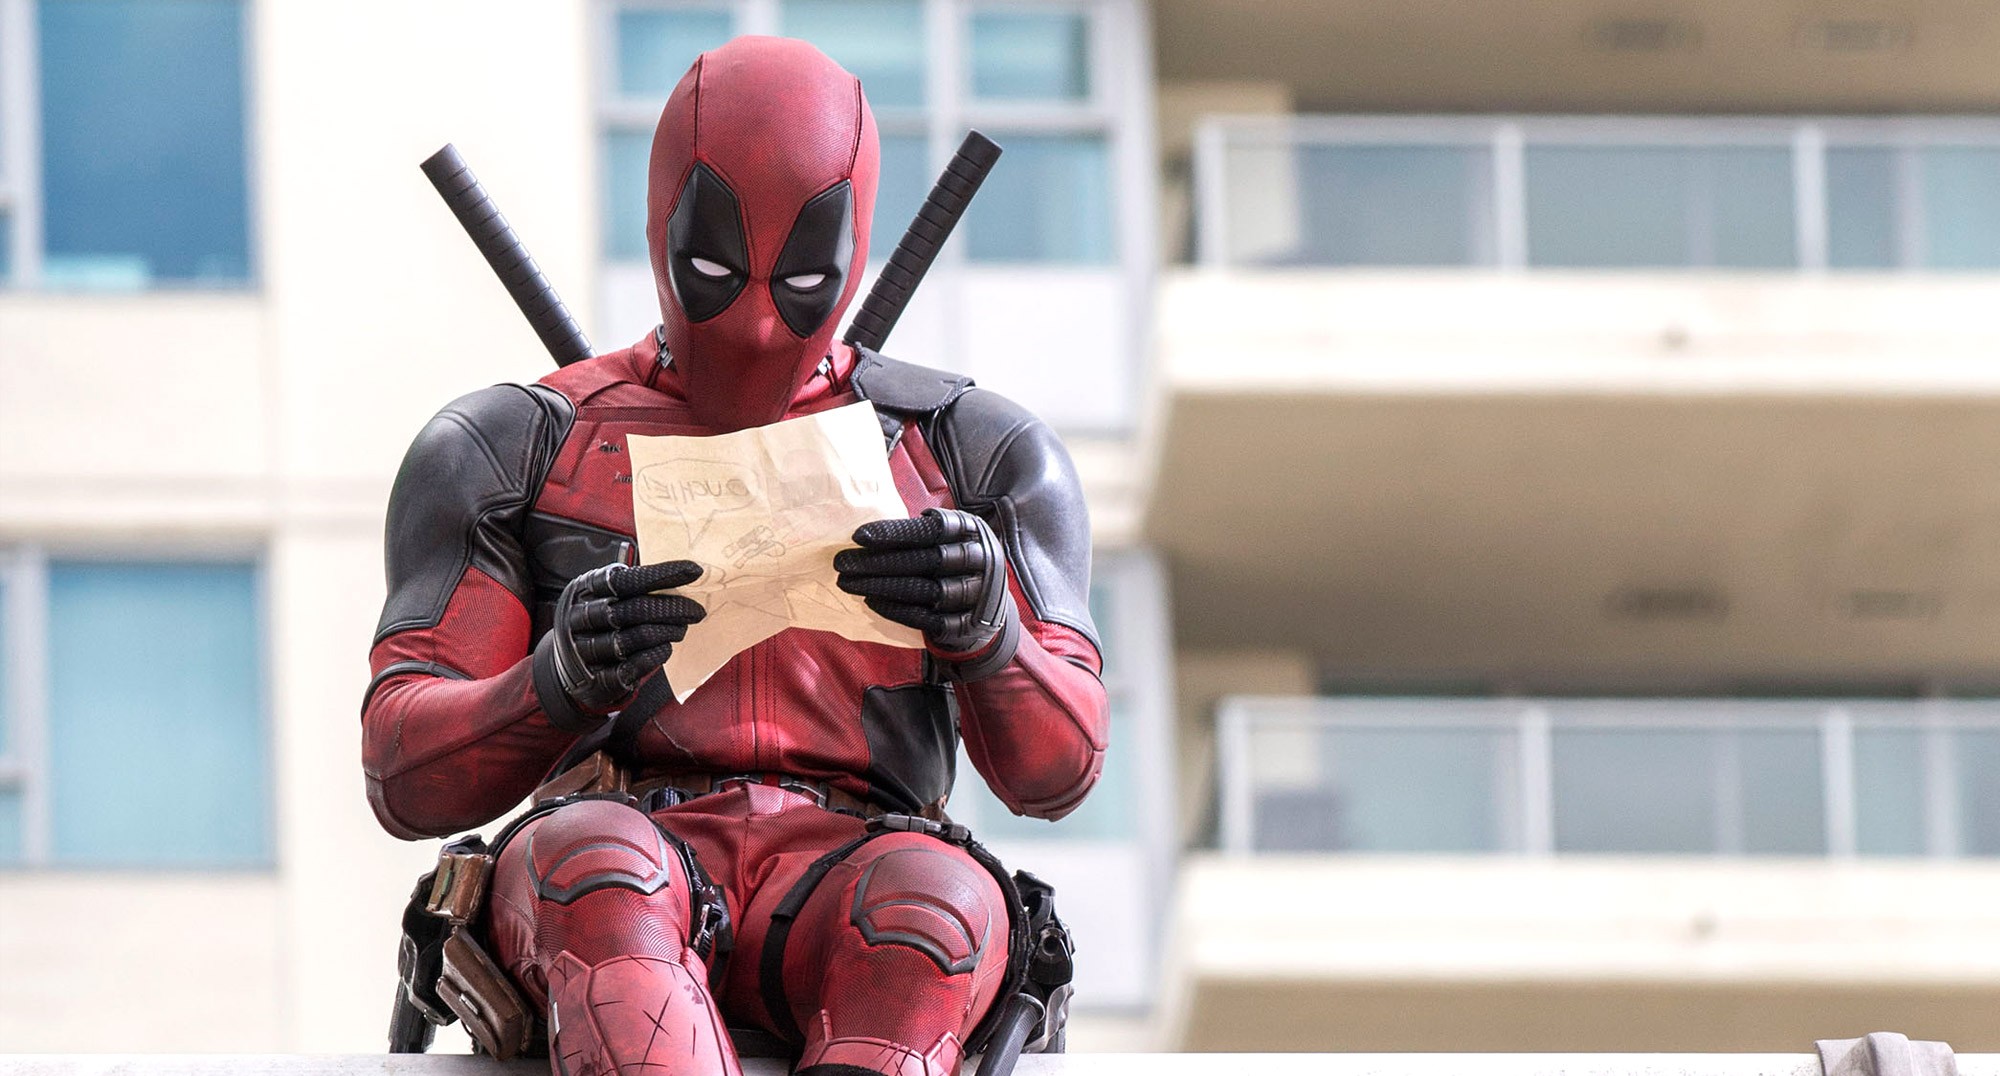 Deadpool reading a note while sitting on a highway.